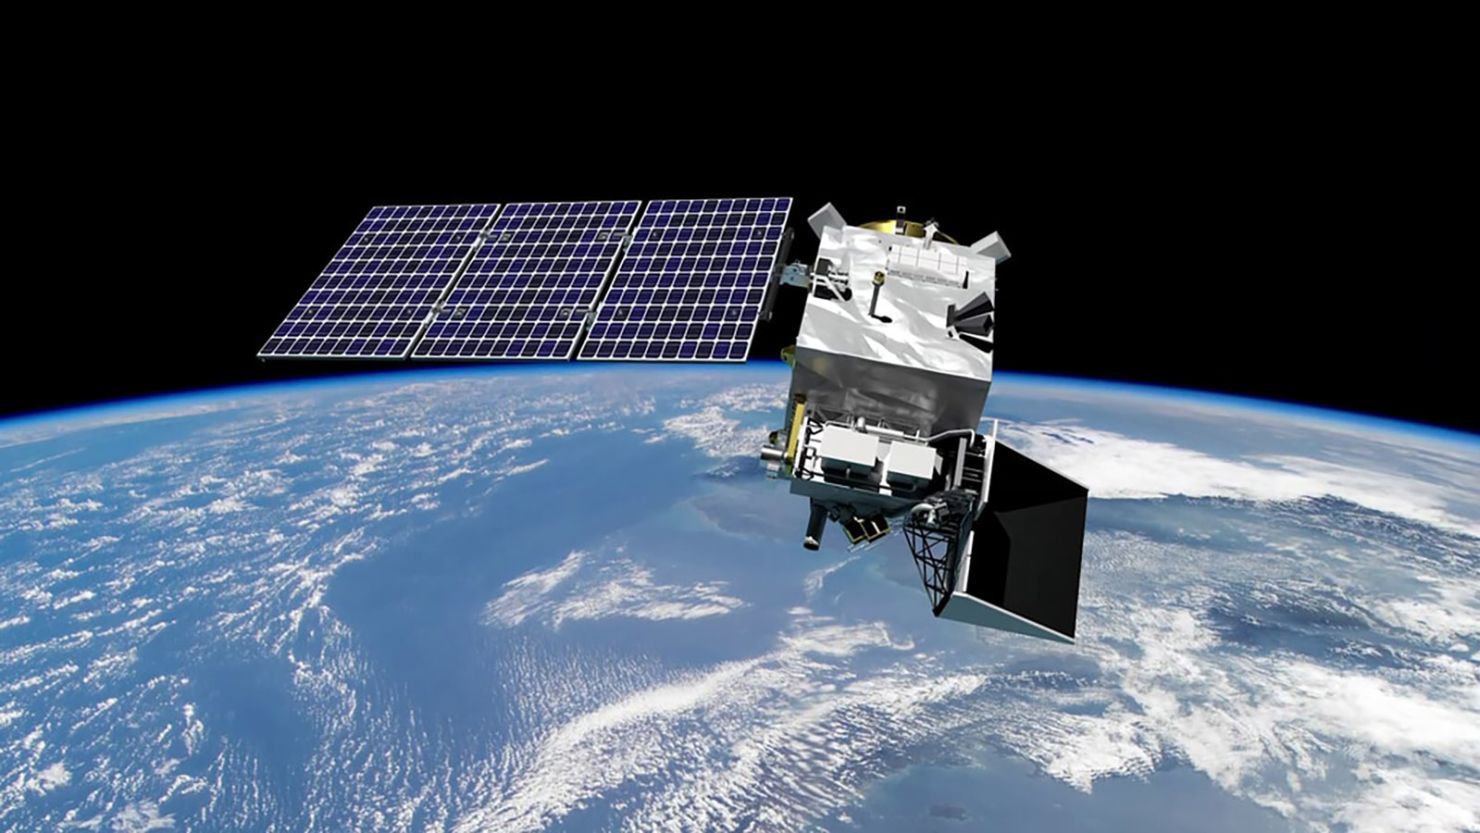 An illustration of the PACE satellite in space hovering above the Earth